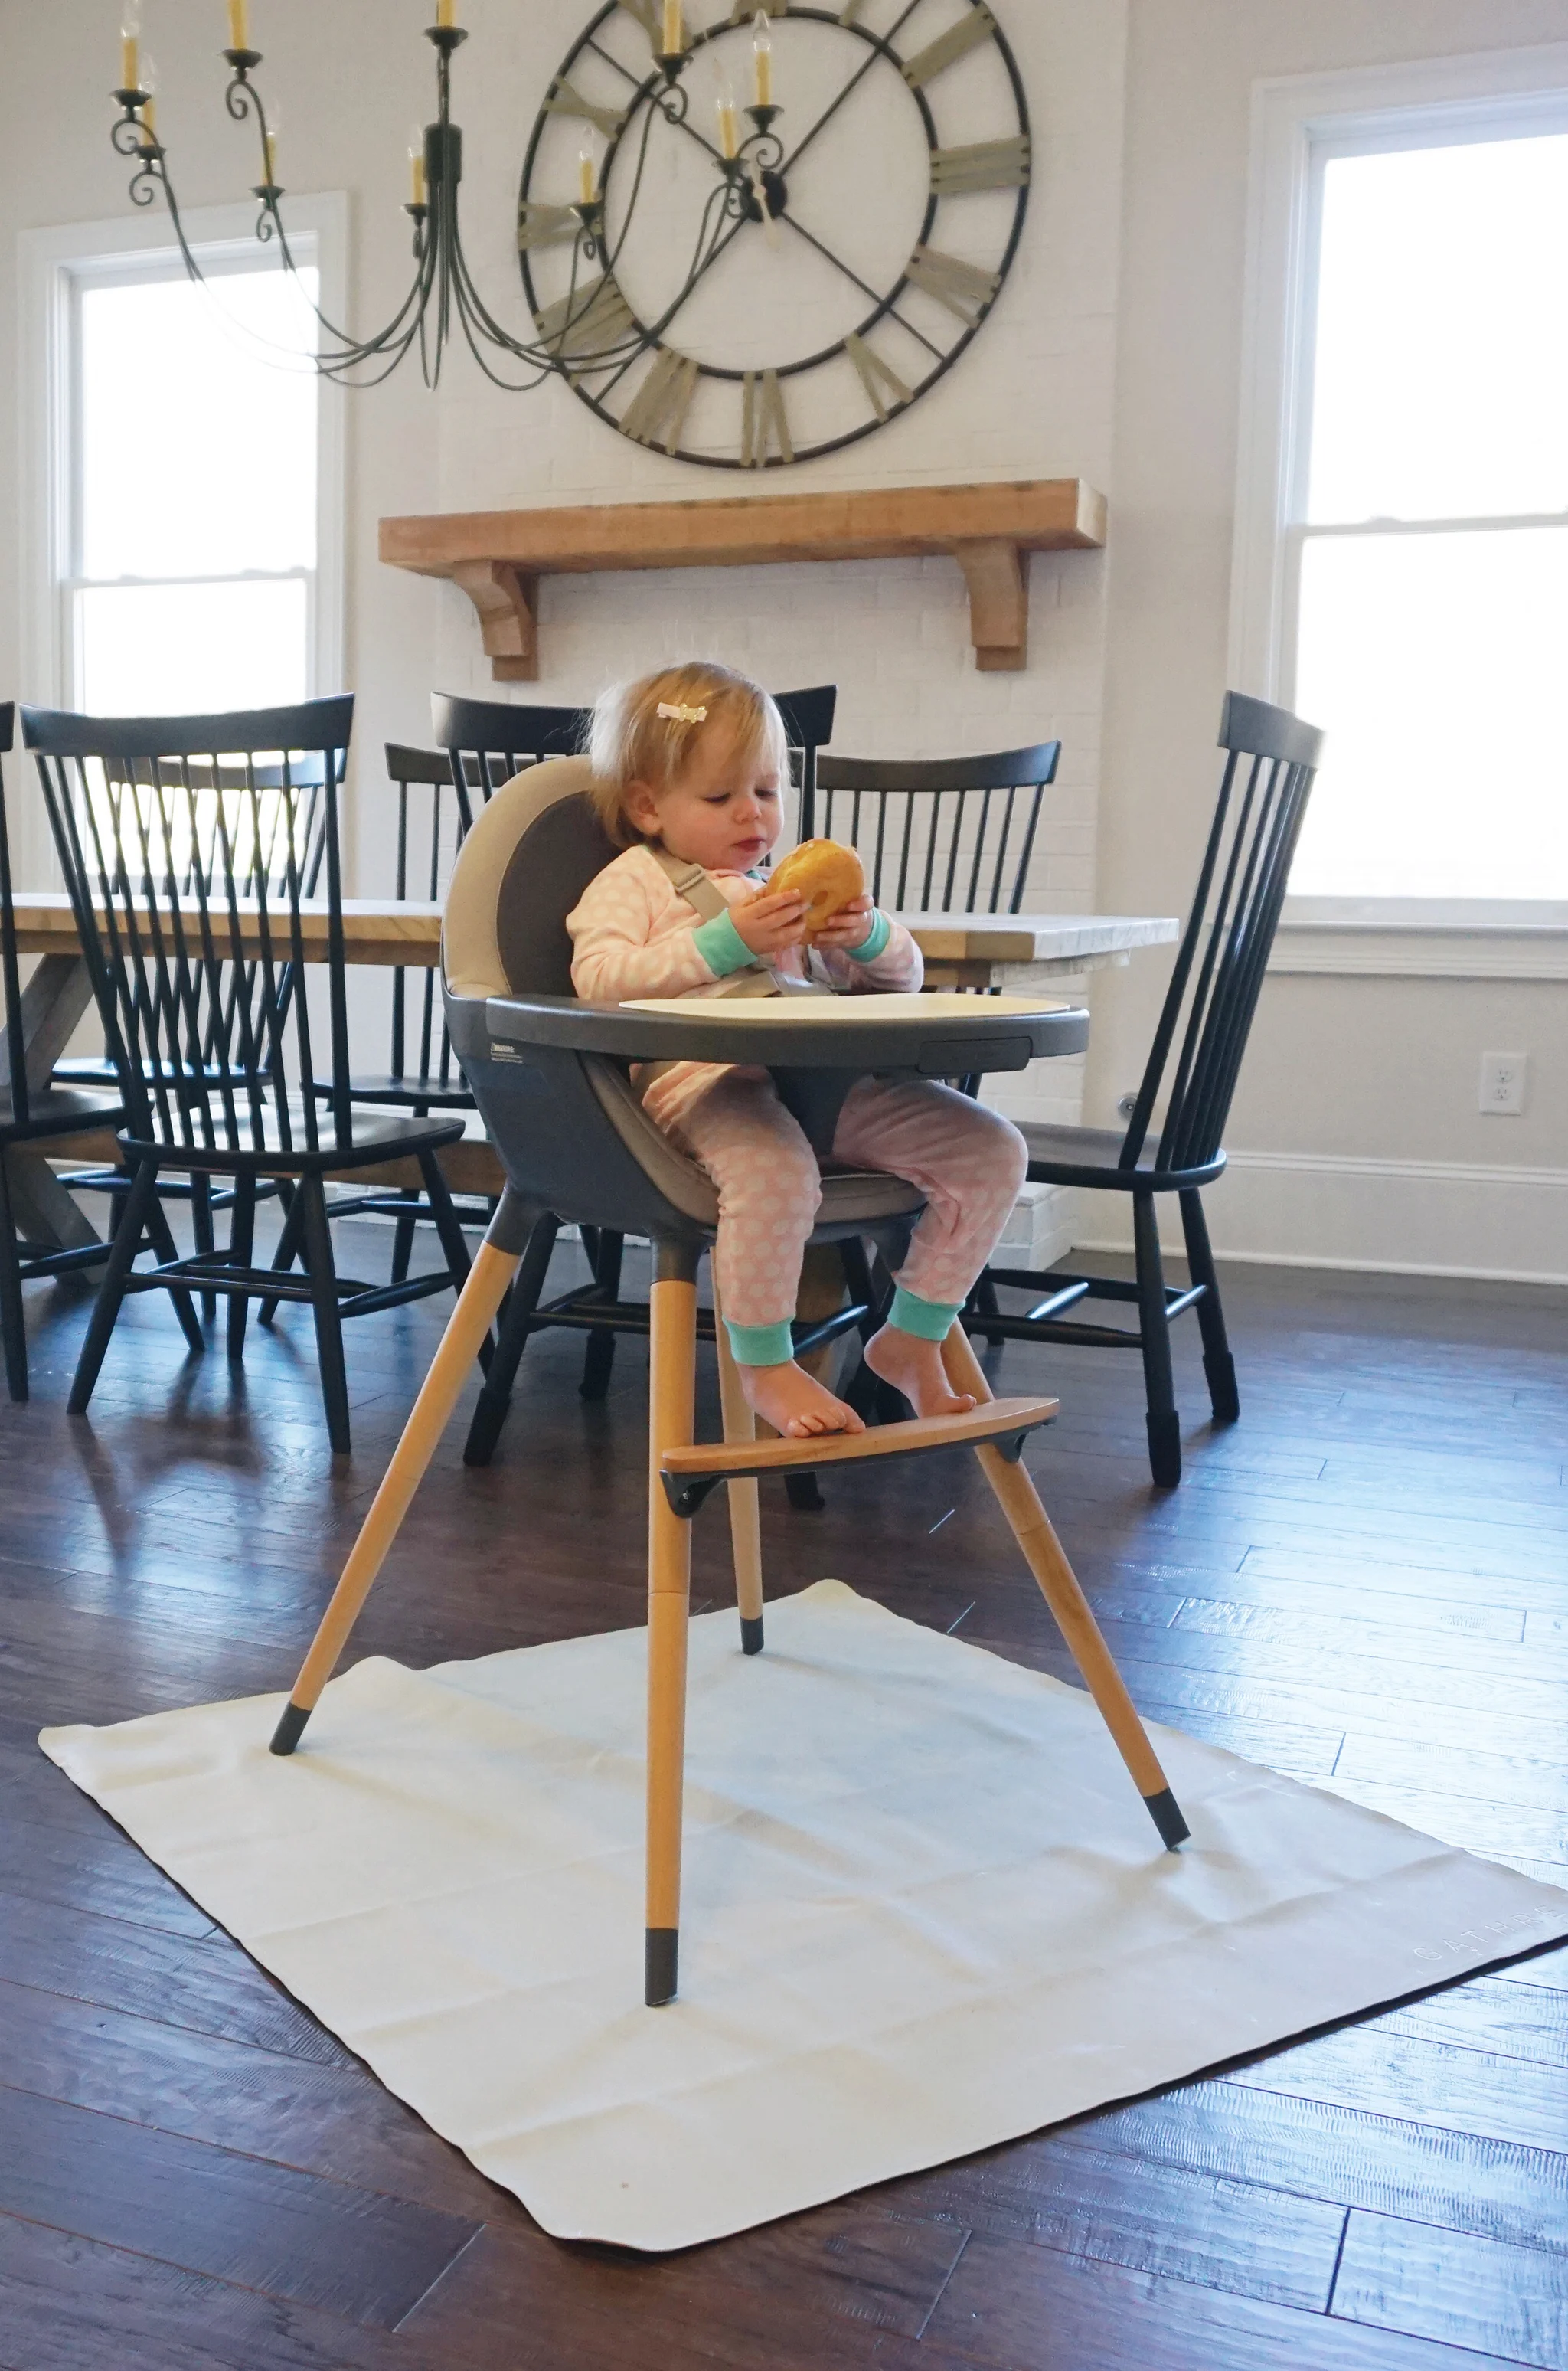 Skip Hop's TUO Convertible High Chair